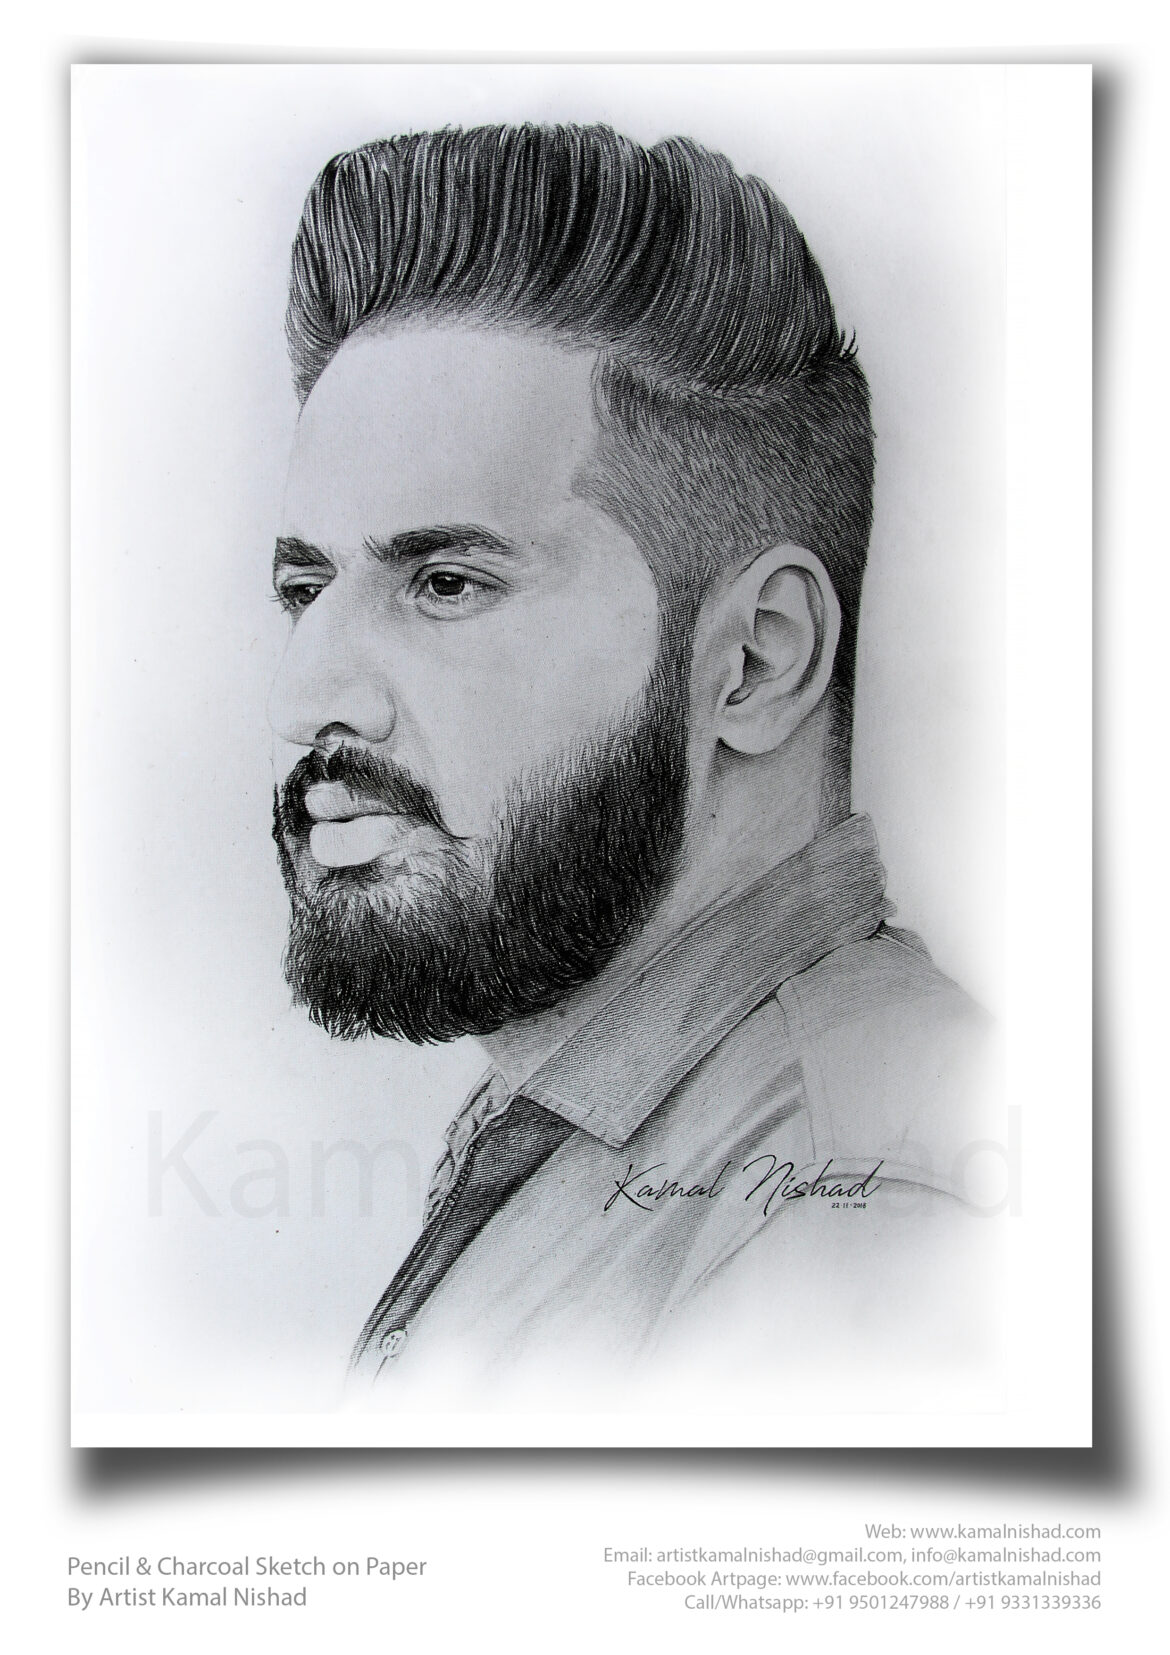 A MAN PORTRAIT | Pencil & Charcoal Sketch This is a Handmade Sketch made with Pencil & Charcoal “A MAN PORTRAIT”. One of my client/customer (GIRL) wanted me to draw her “Special One’s” portrait for his birthday gift. SIZE: A3 Created by © Kamal Nishad. All rights reserved.